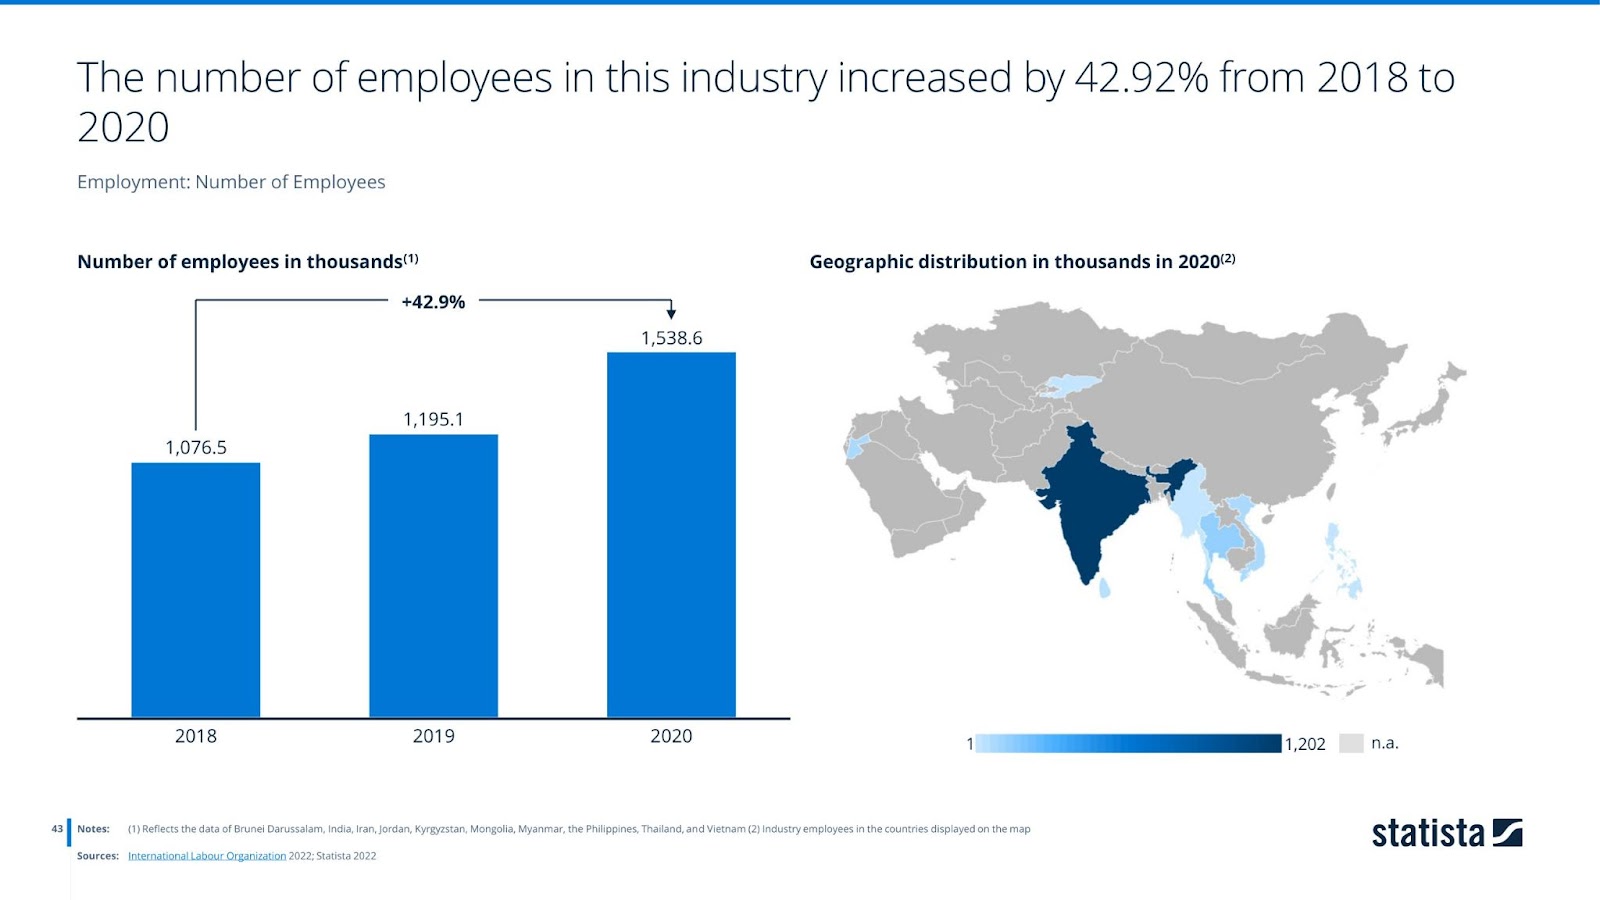 Number of employees and geographic distribution